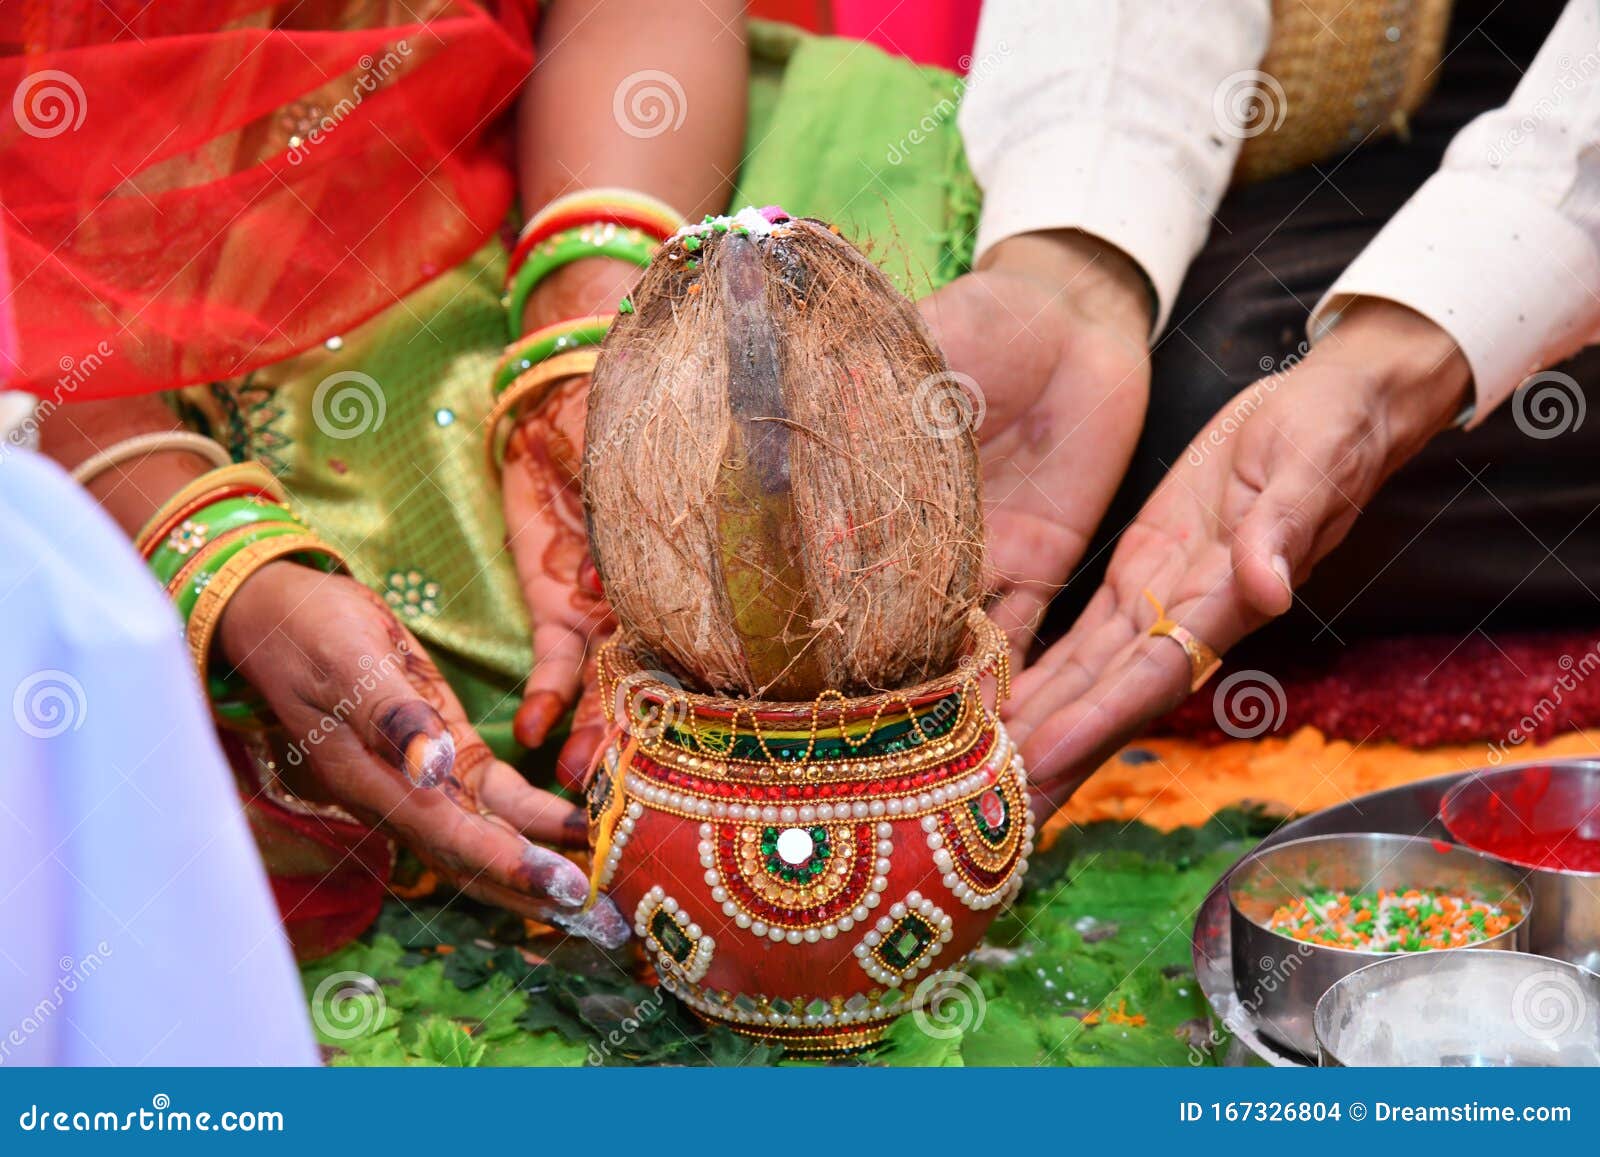 pote and coconut with man and woman hand